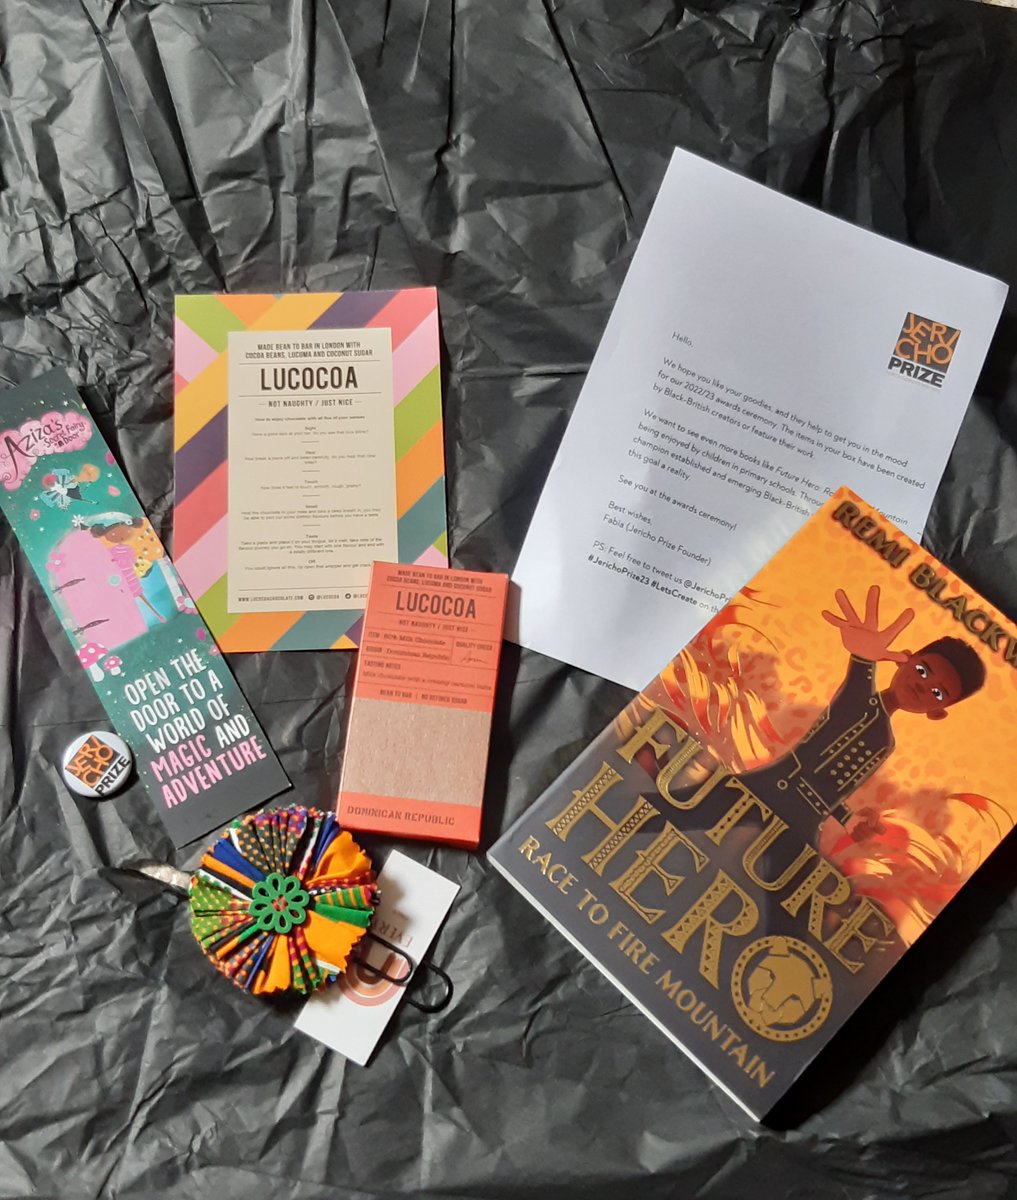 Yay! Received a 'Goodie Bag' from #JerichoPrize for being one of the first  8 people to book tickets for the Eventbrite #JerichoPrizeAwardCeremony 27th July '23